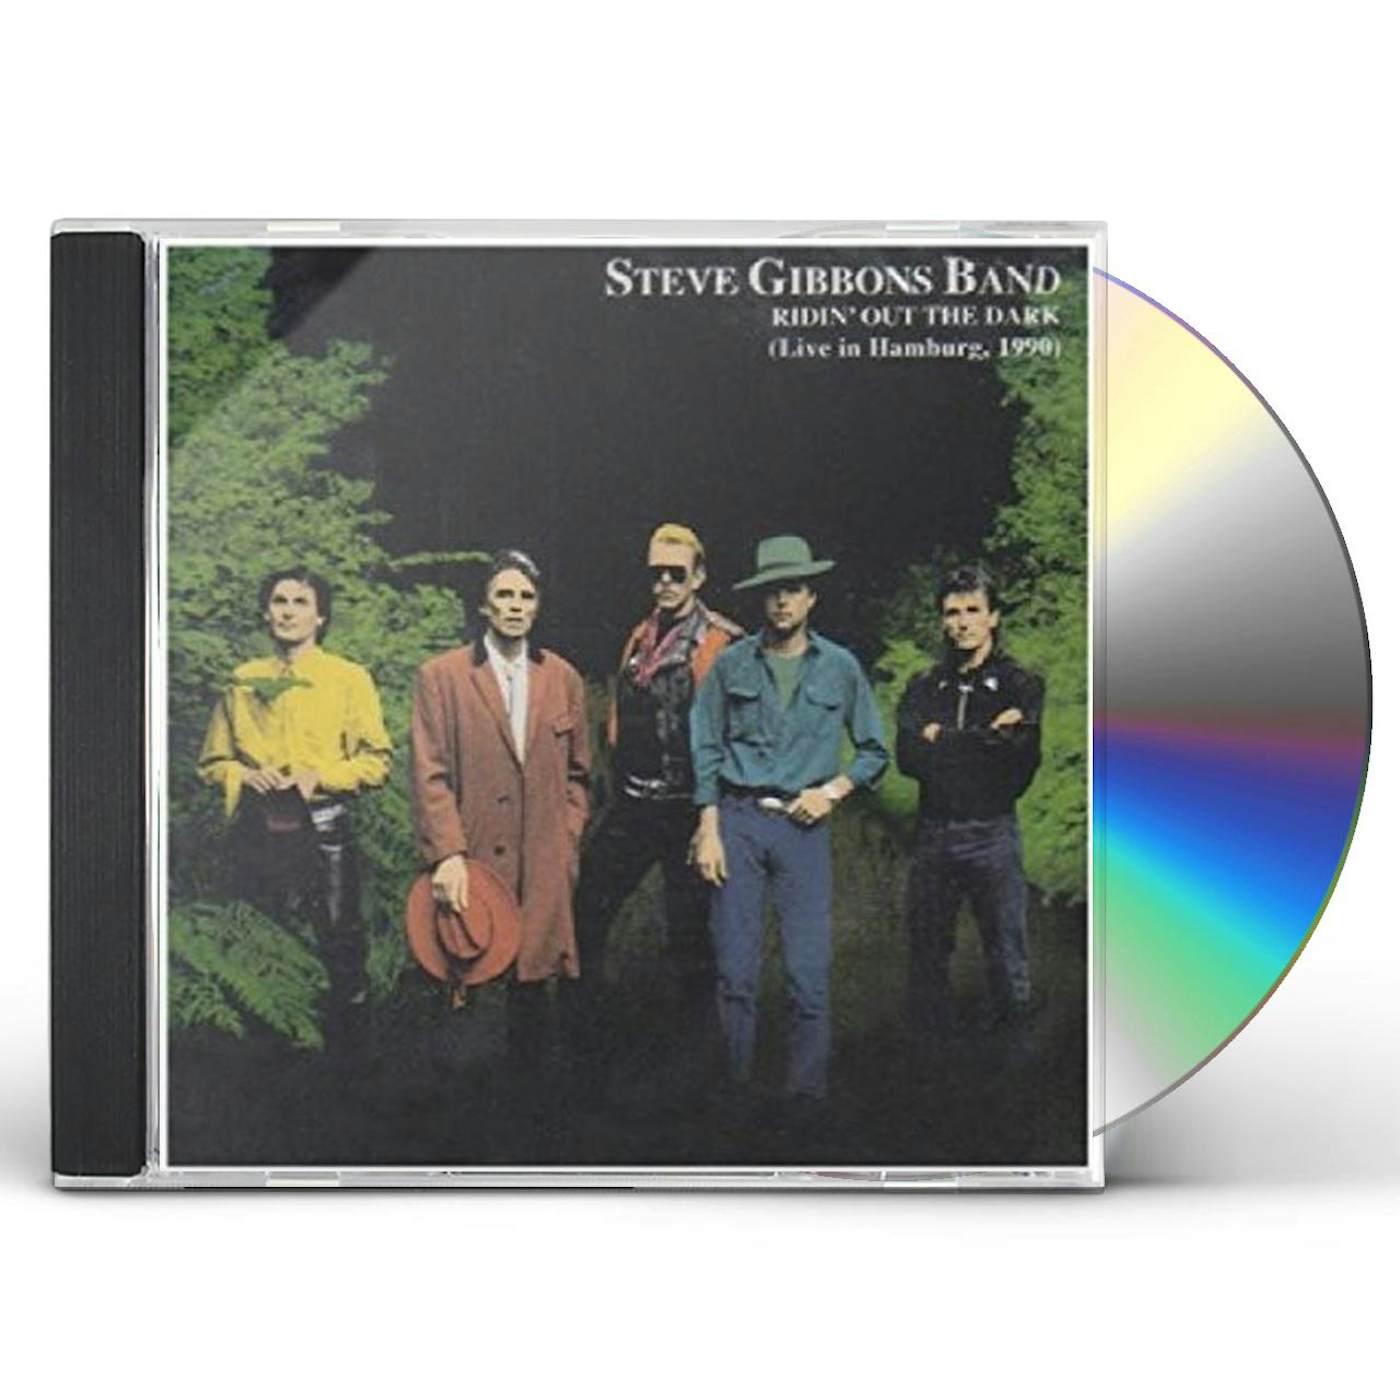 Steve Gibbons RIDIN' OUT THE DARK (LIVE) CD